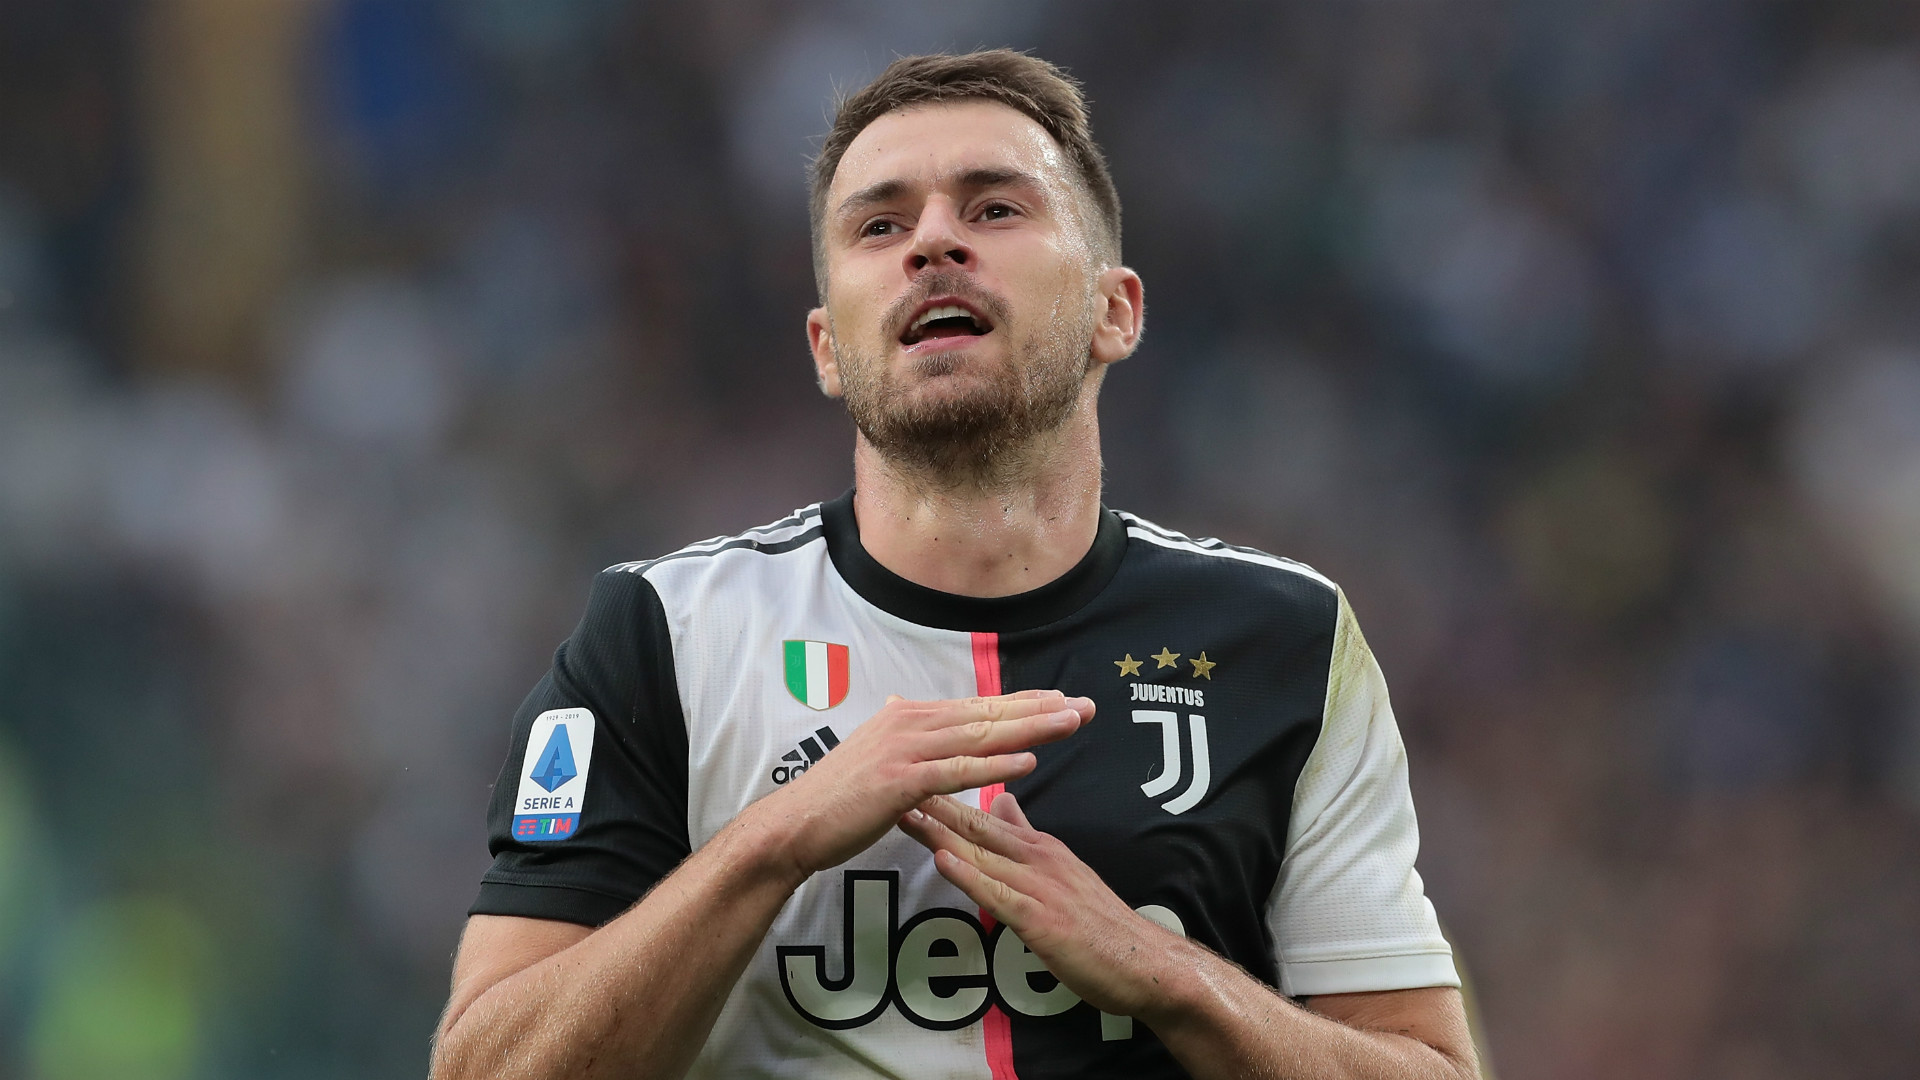 Ramsey tells Sarri his best position and explains what it’s like to play with Ronaldo and Dybala